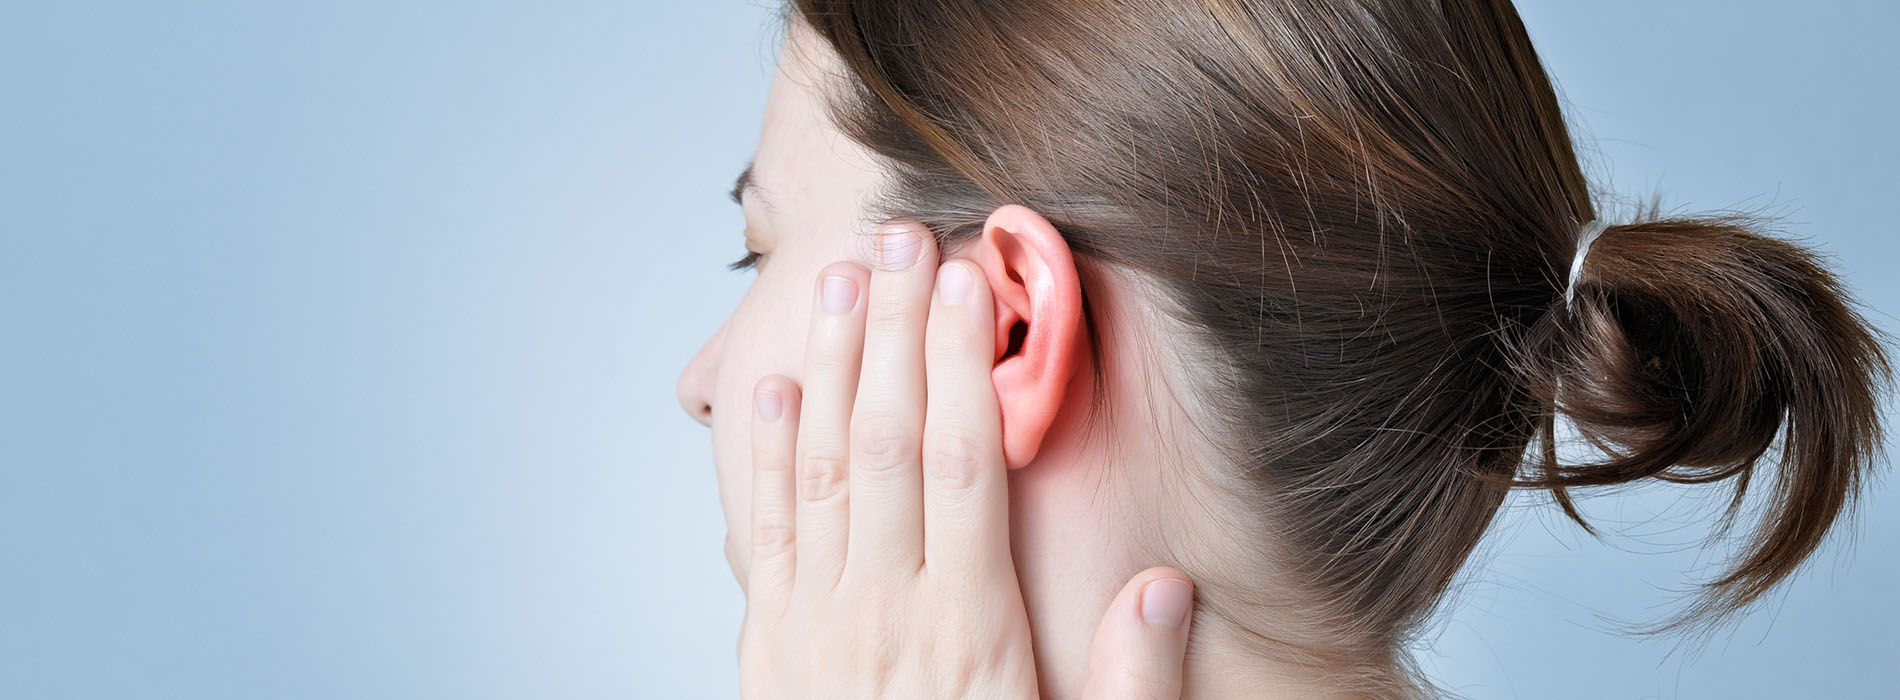 Profile of woman touching her sore ear